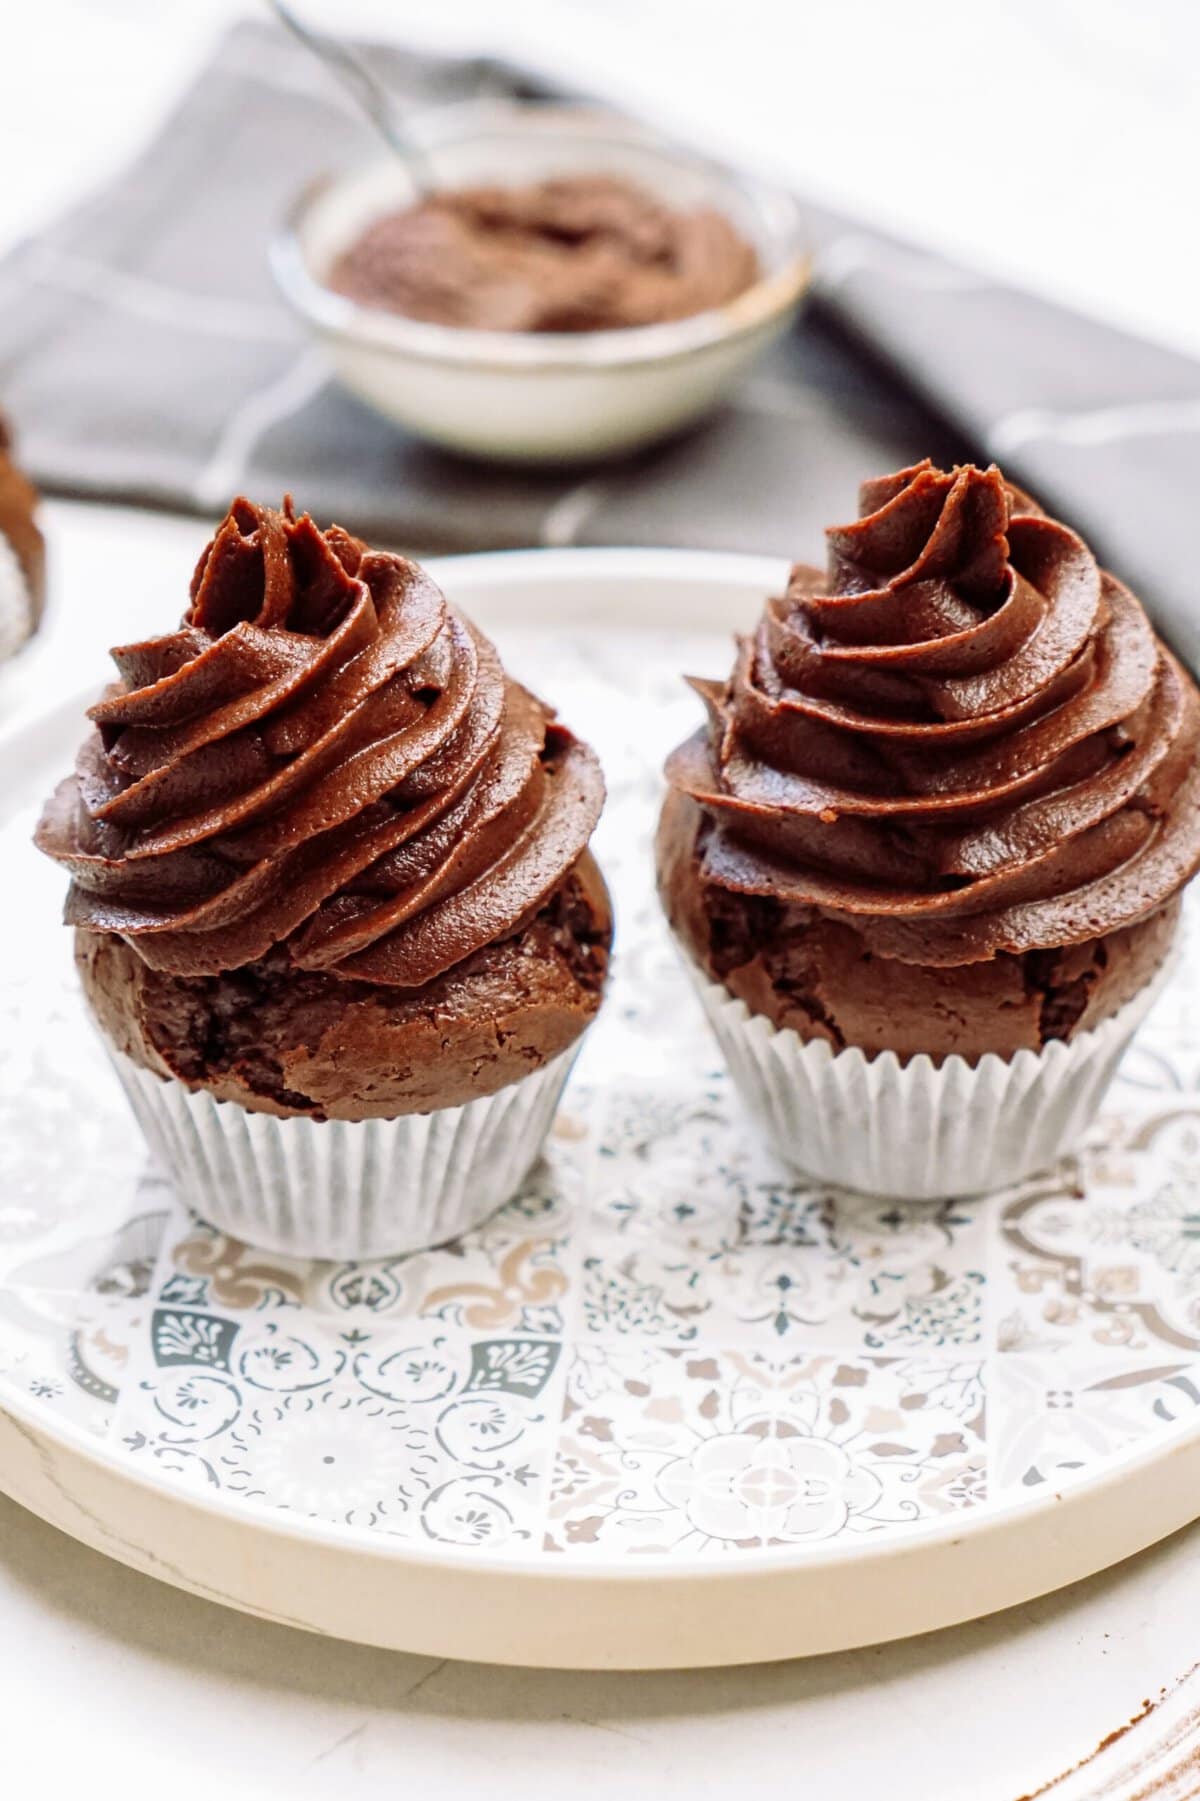 Two chocolate cupcakes with swirled frosting on a decorative plate.